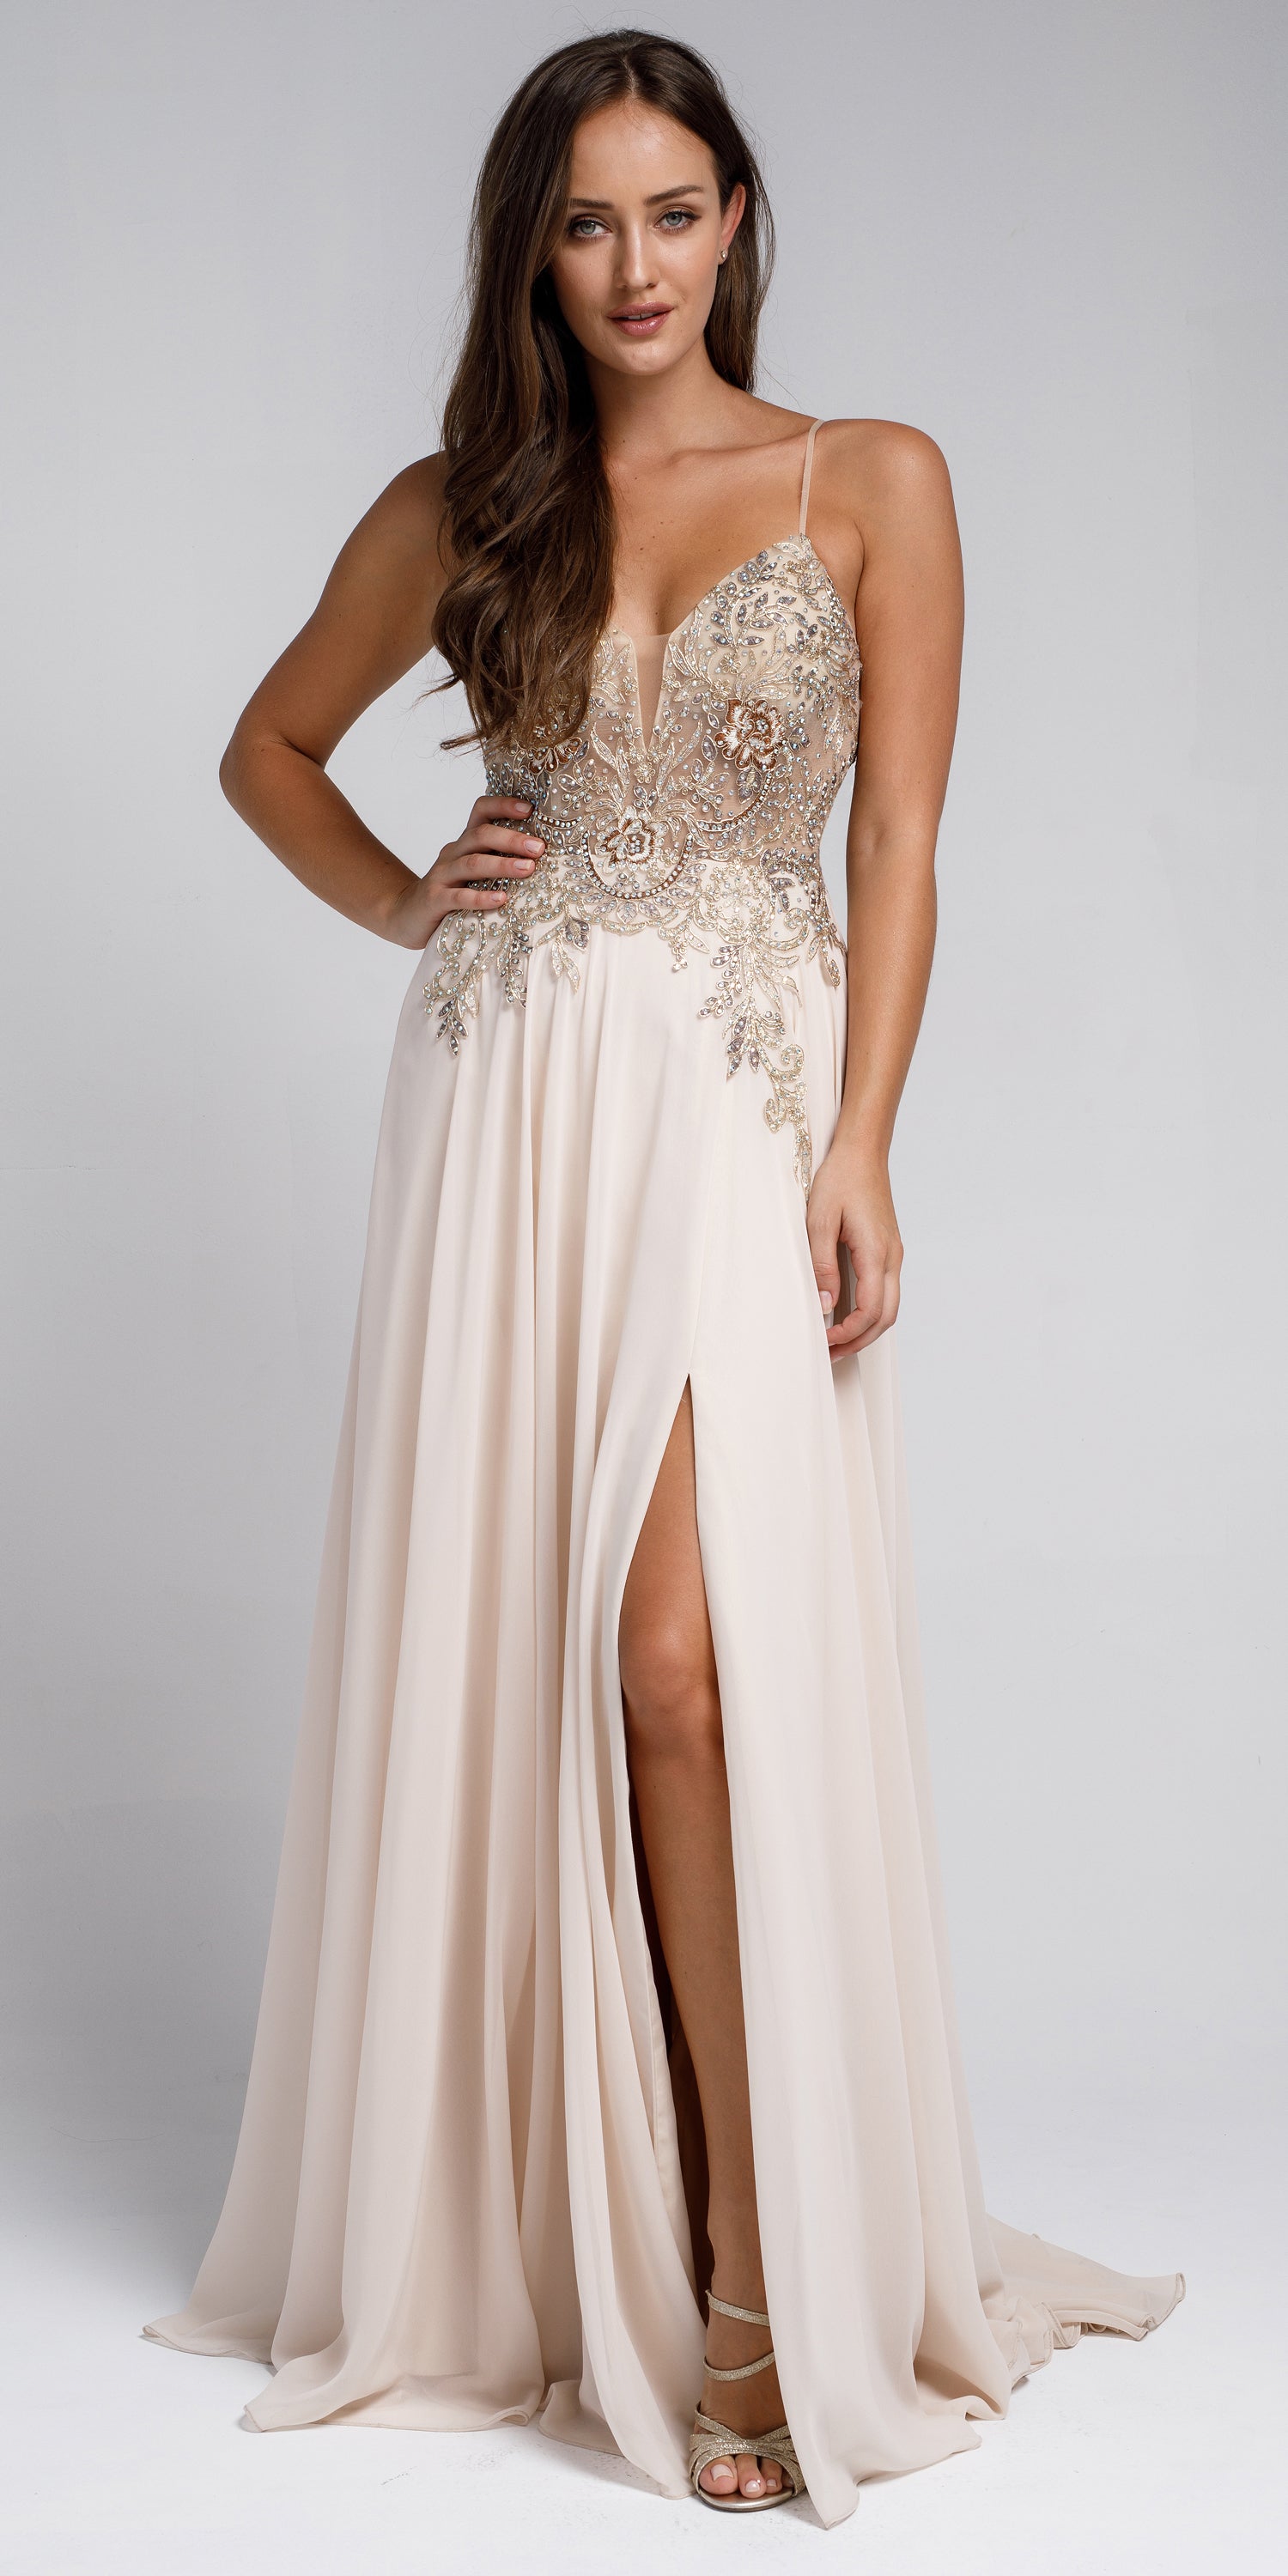 Image of Beaded Embellished Spaghetti Prom Dress in Champaign